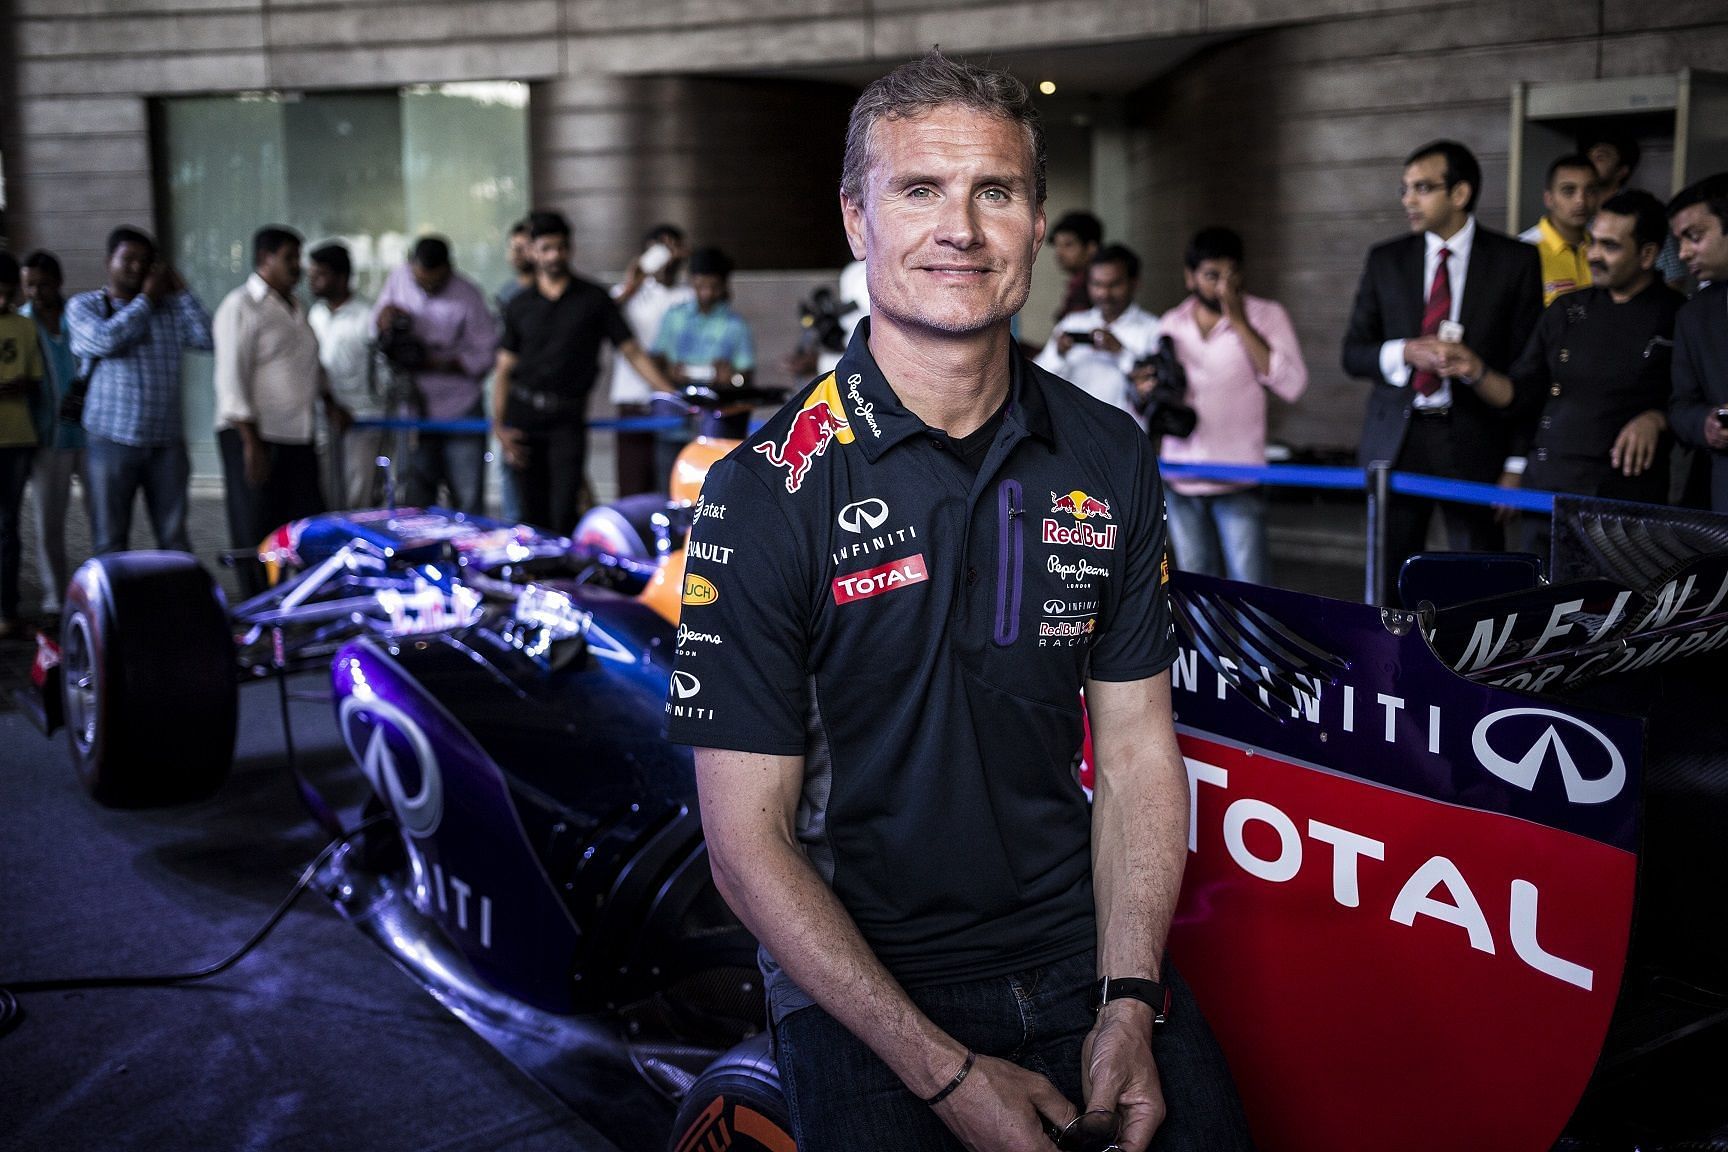 David Coulthard attends a press conference at the Red Bull Showrun 2015 in Hyderabad, India on April 4th, 2015